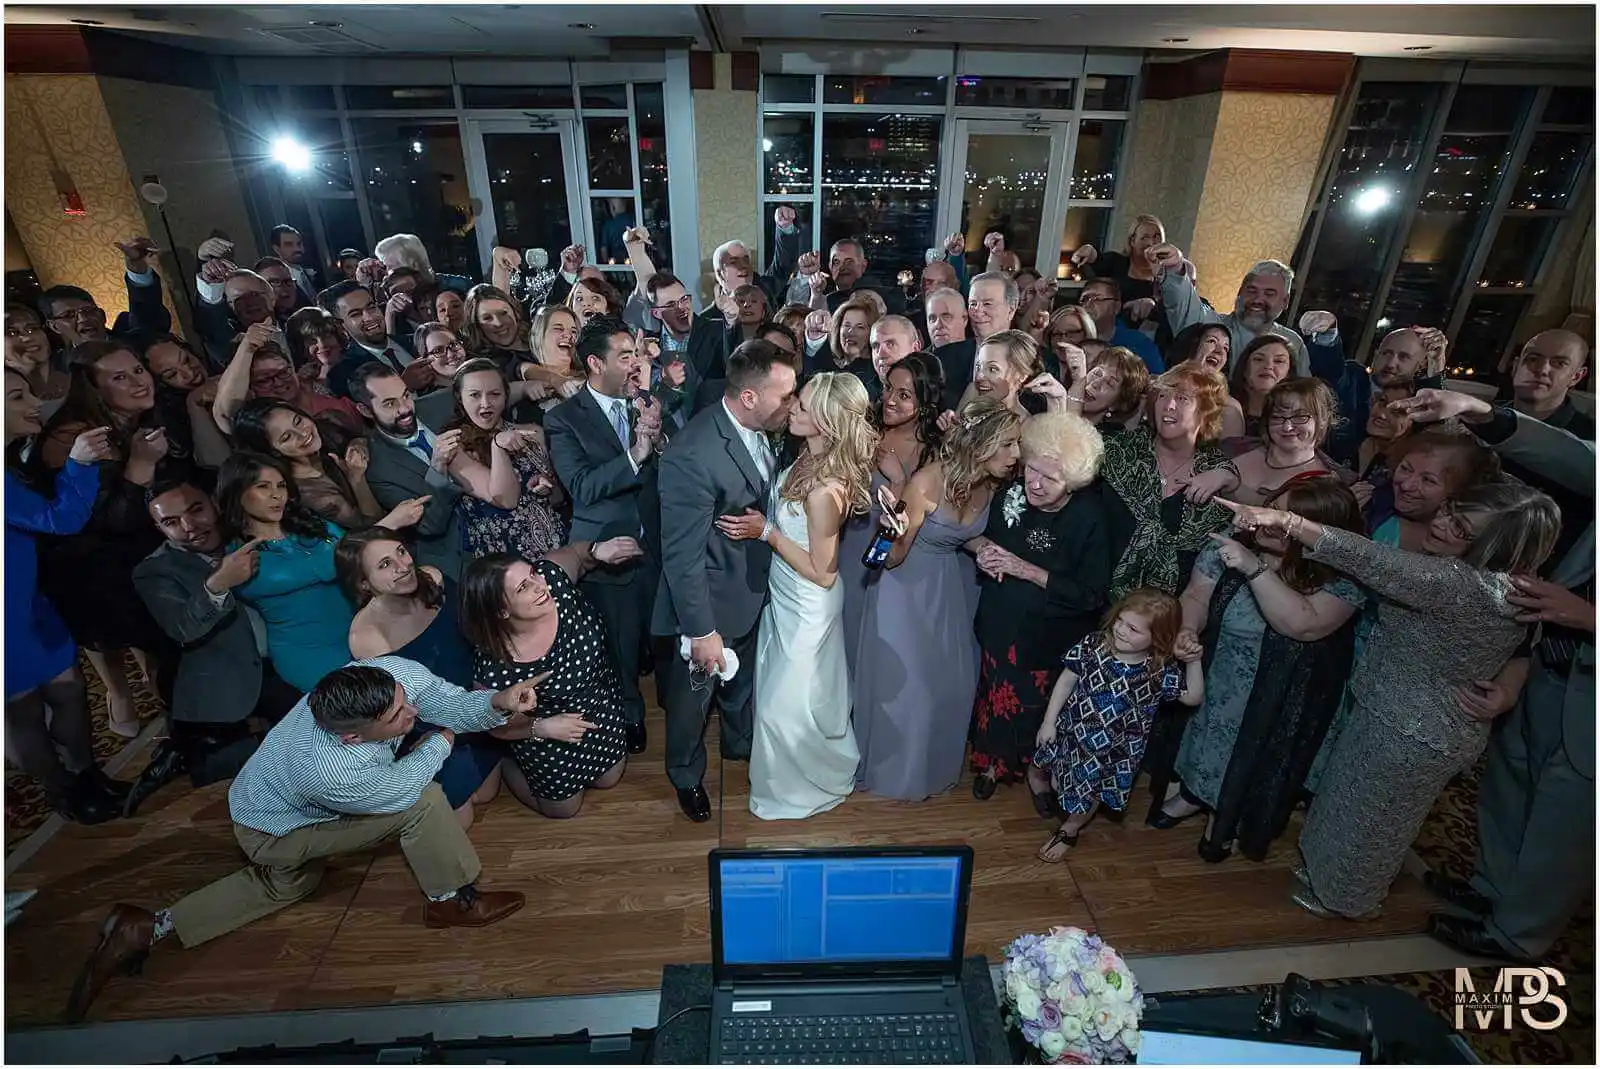 Energetic wedding reception with happy guests celebrating around the bride and groom.